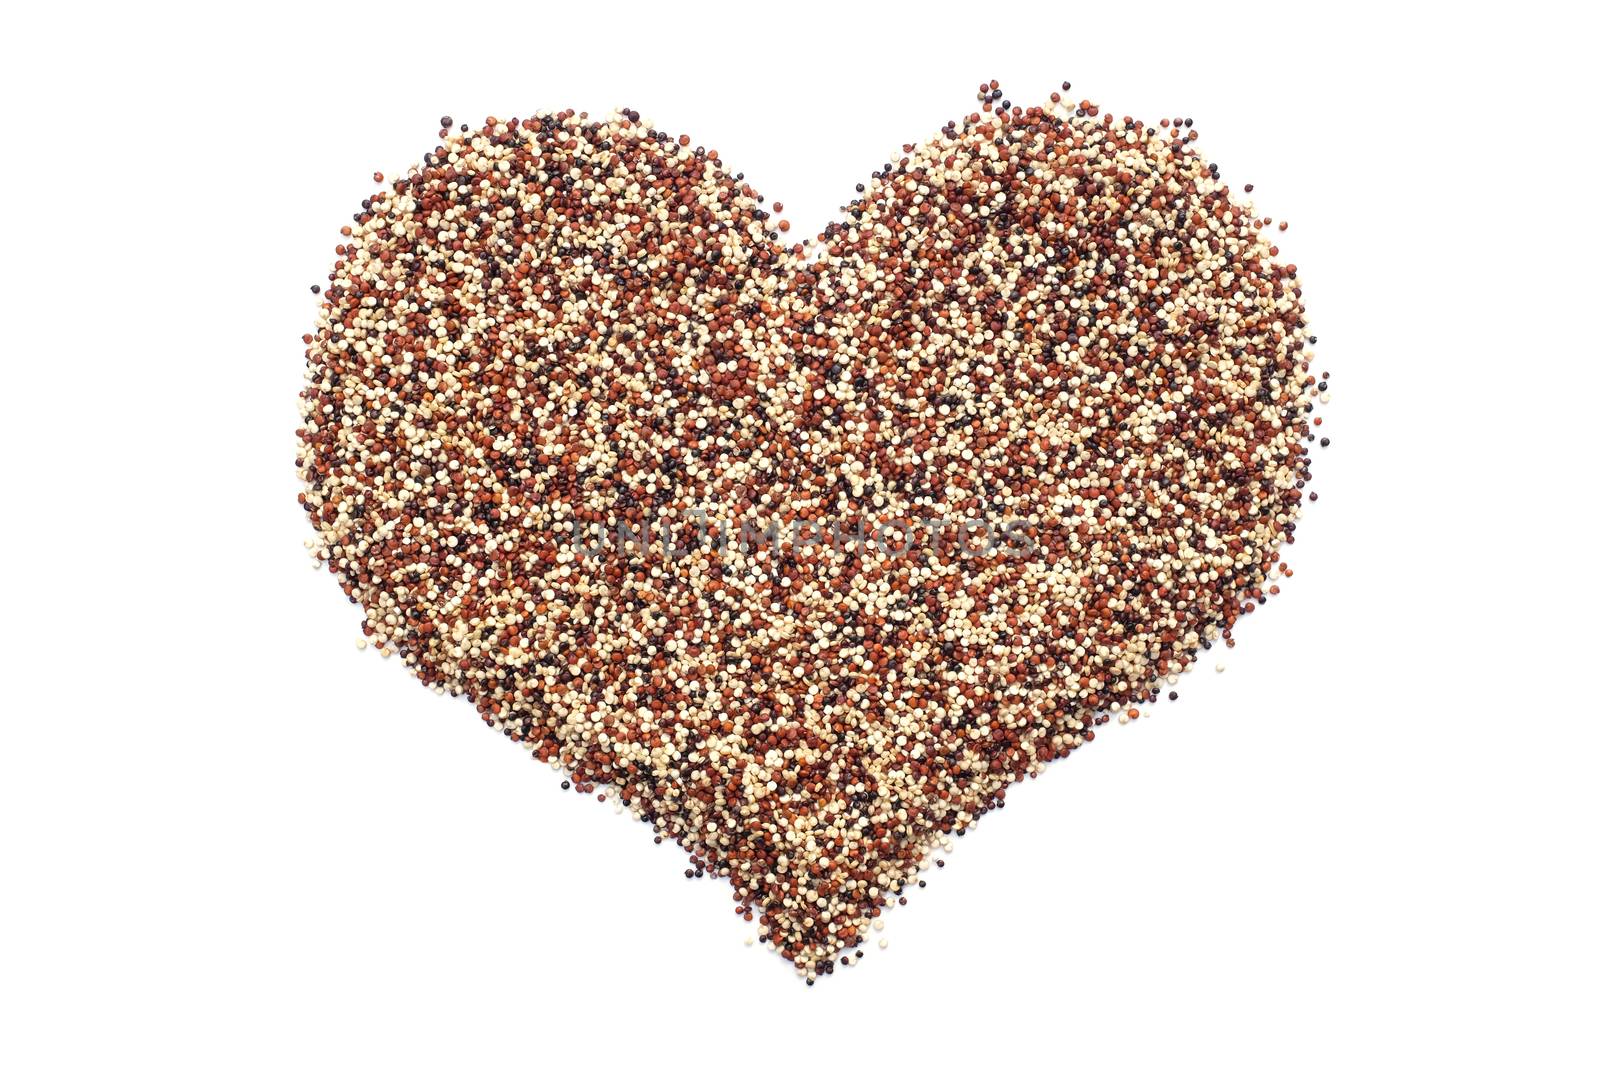 Mixed quinoa in a heart shape, isolated on a white background